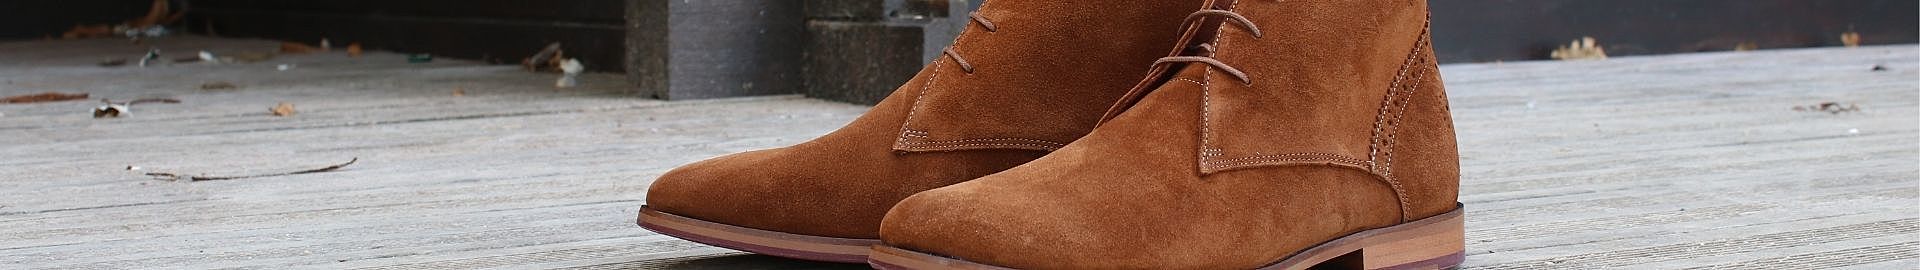 Chaussures Paraboot pour hommes